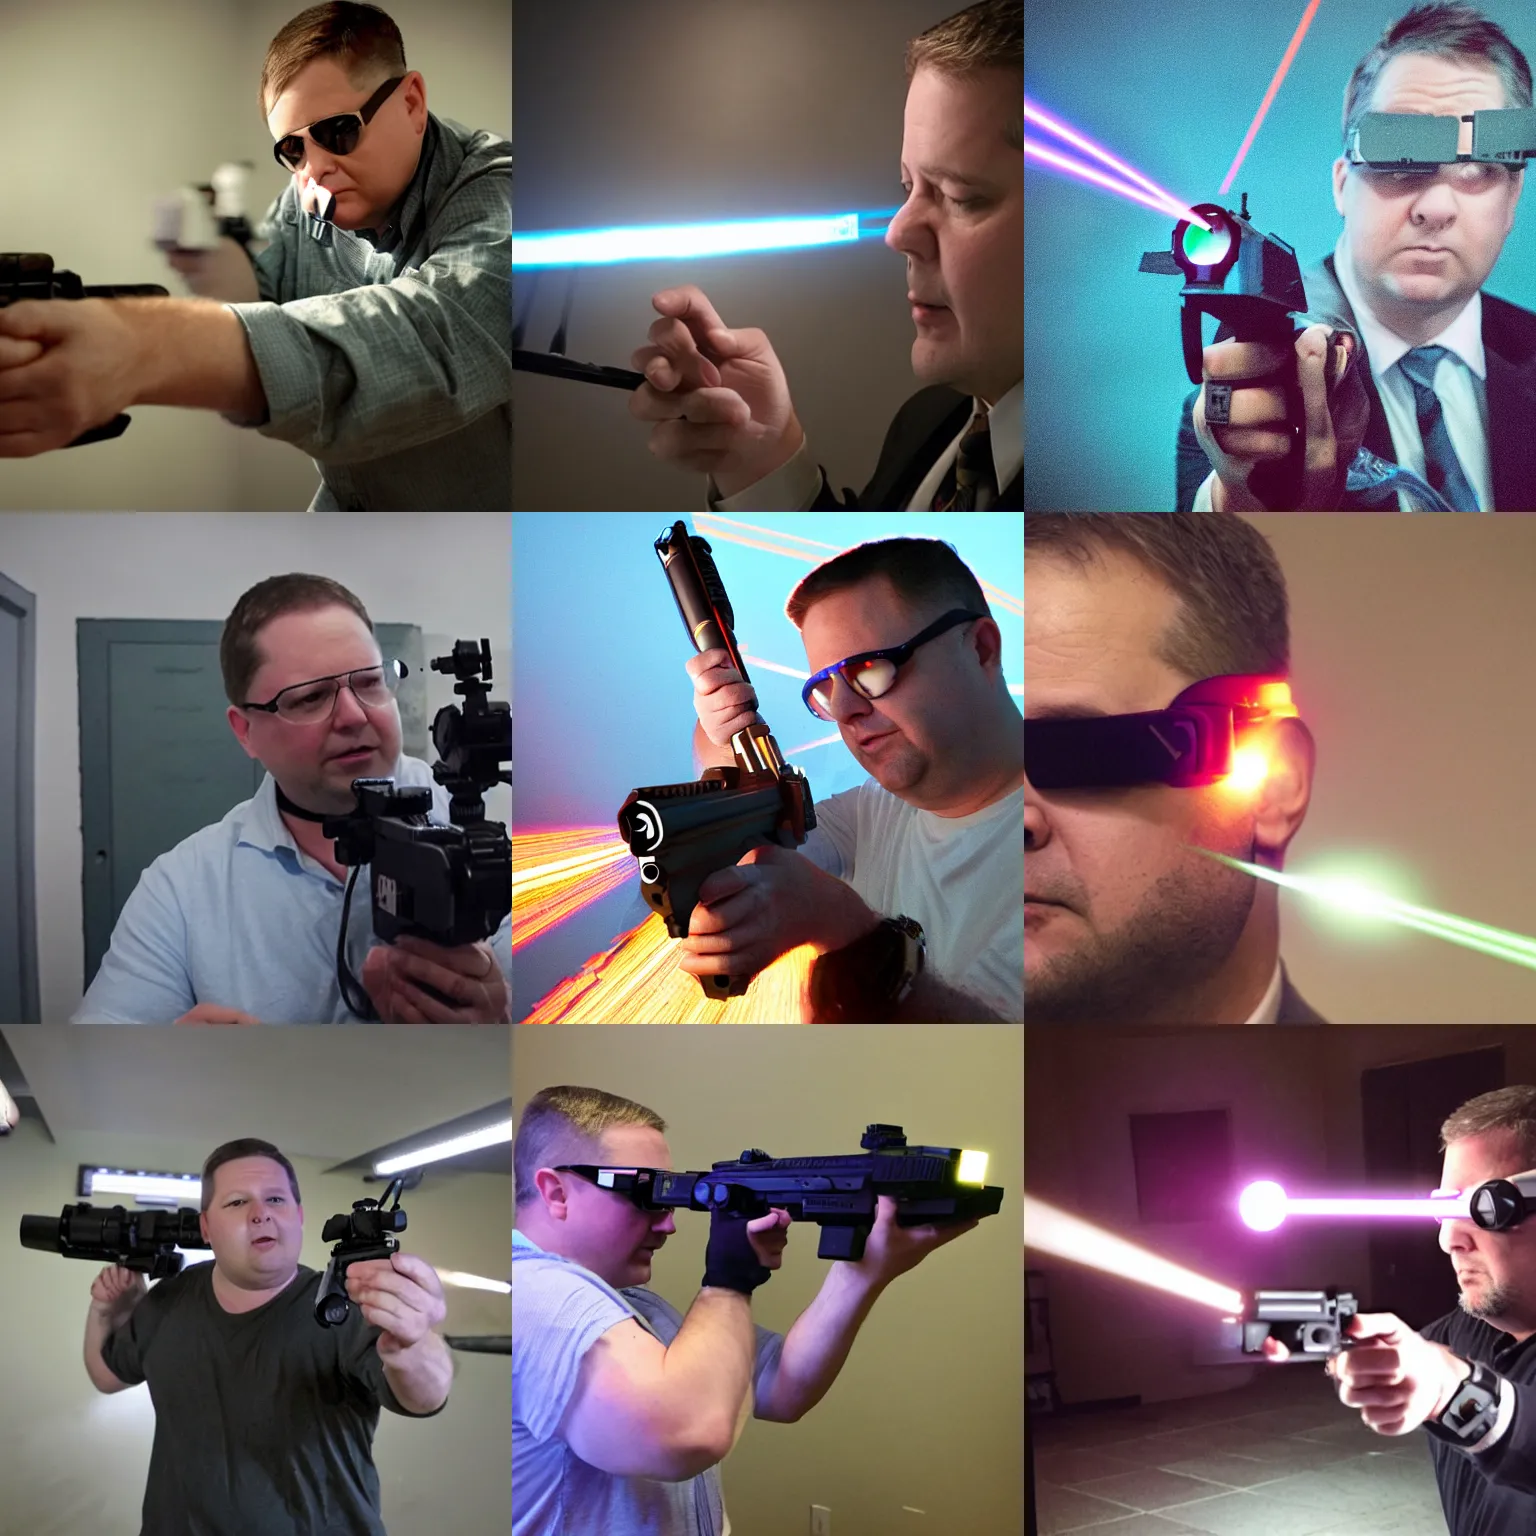 Prompt: ag eric garland shooting lasers out of his eyes like the boys on hbo on amazon. vfx action movie.